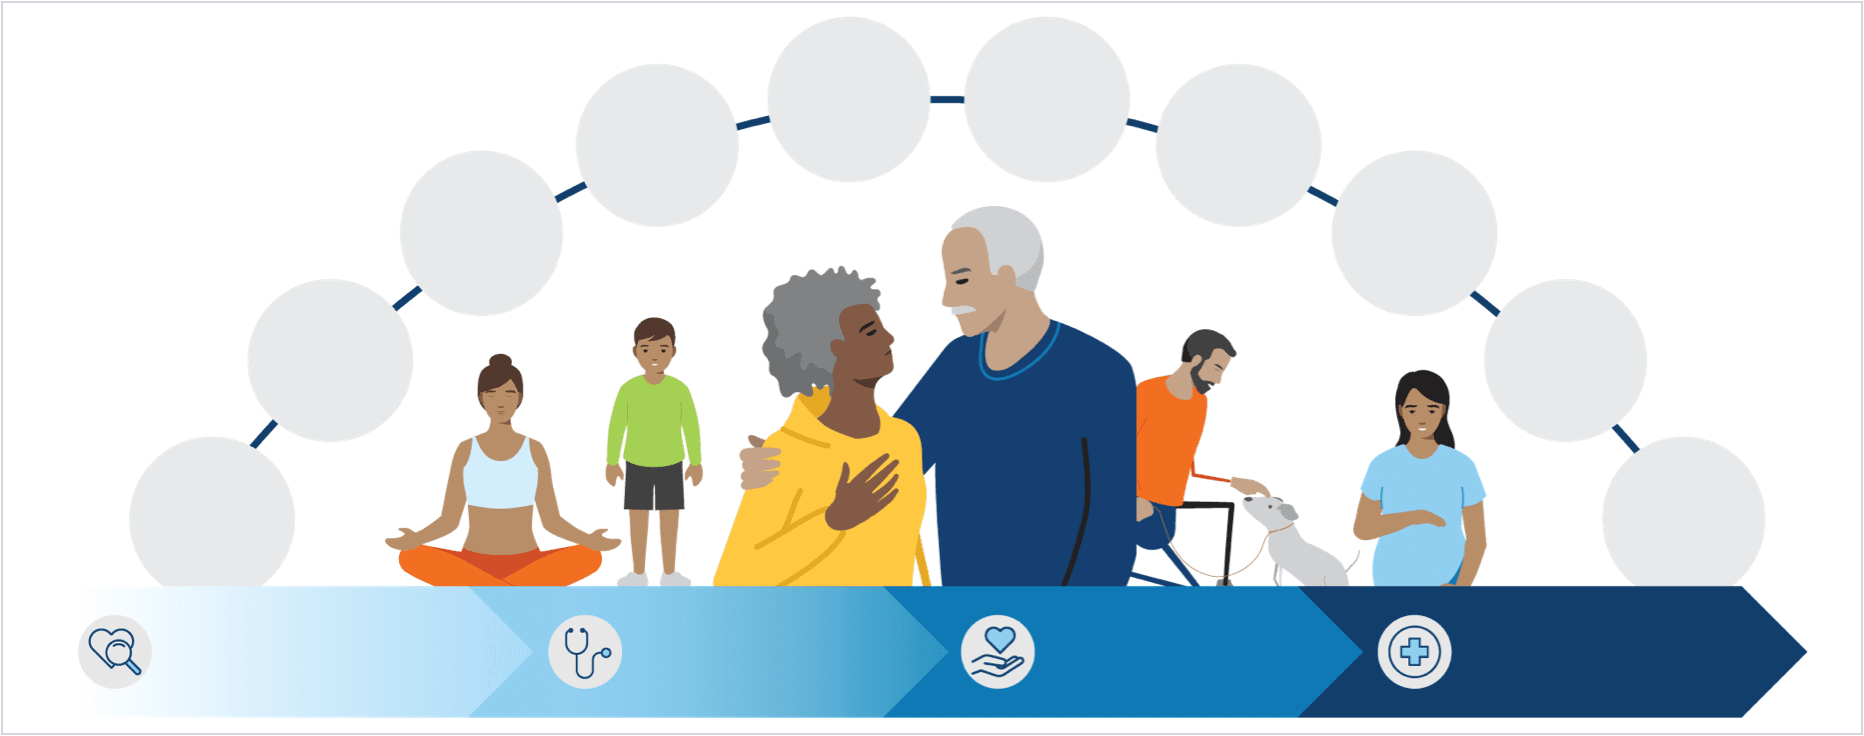 Infographic showing a list of K P mental health services in an arch above images of a pregnant woman, a child, an older couple, a man with a walker and a dog and pregnant woman. Below this is a set of four arrows with the four levels of care these services are integrated into.